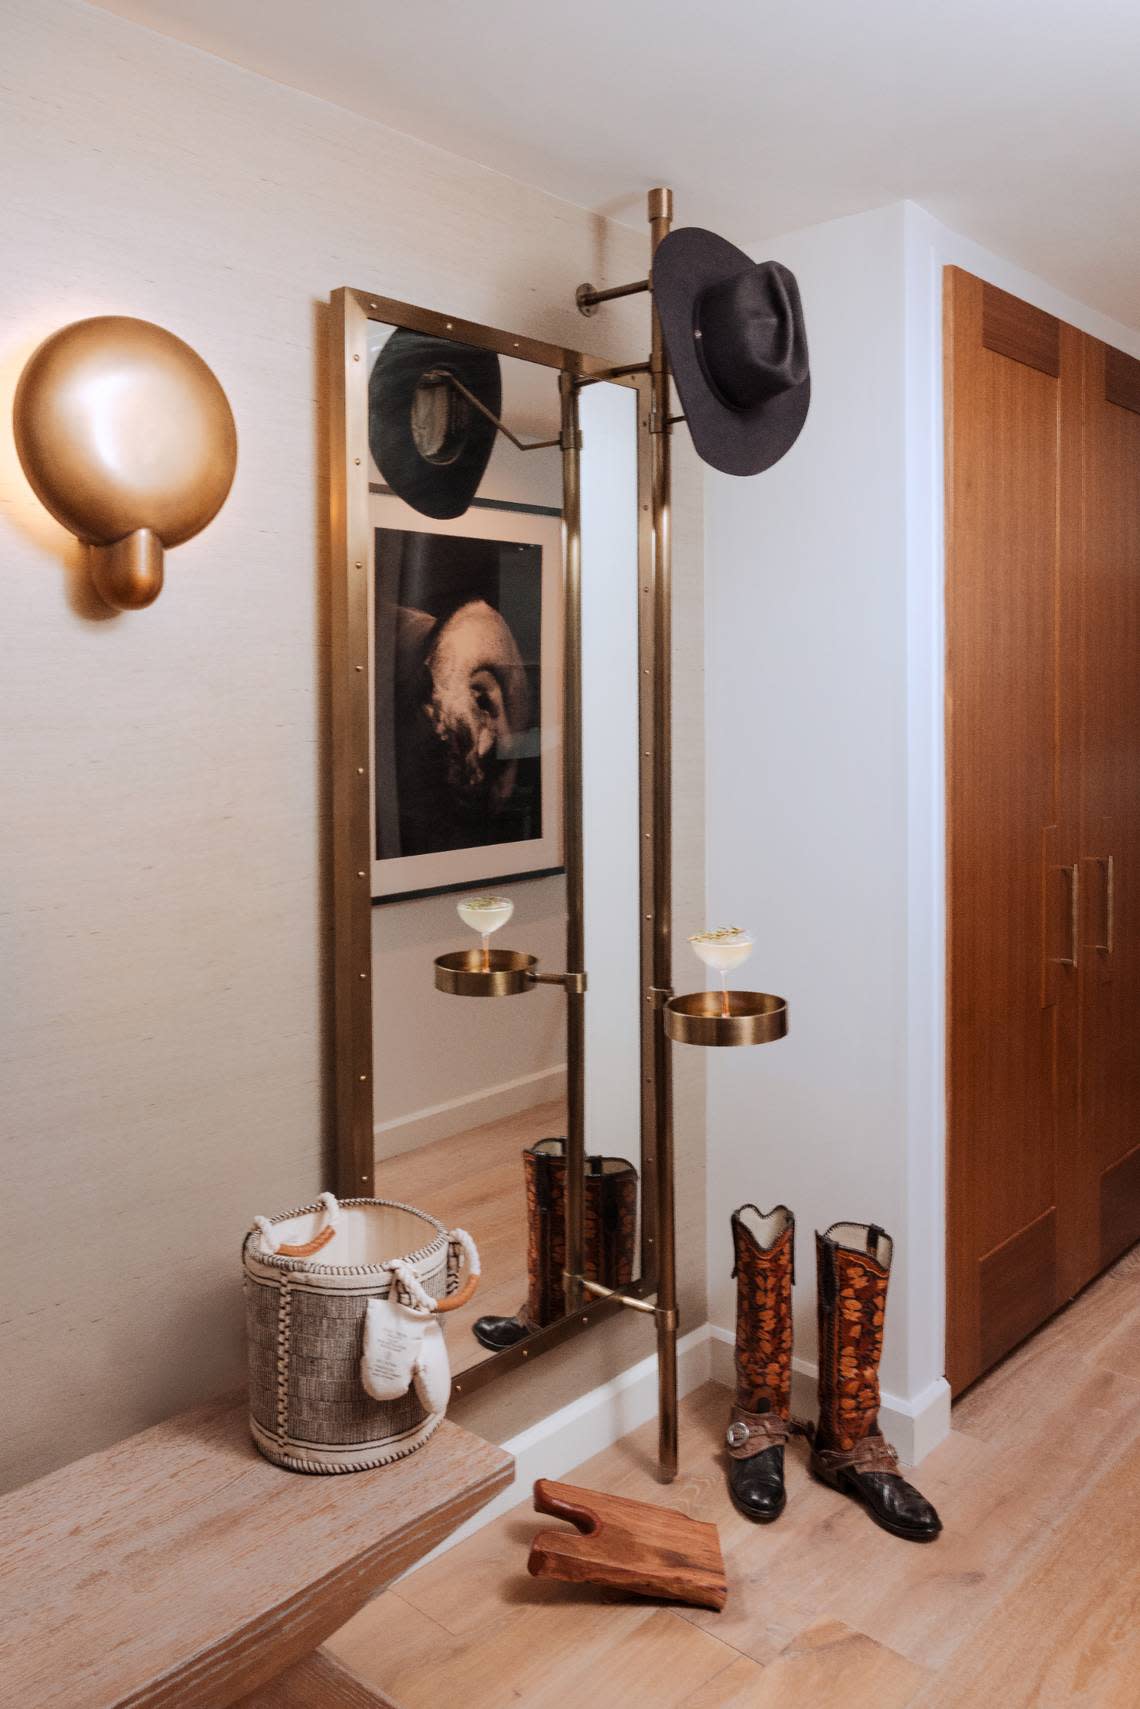 Bowie House combines modern elements with a pull on Fort Worth’s classic Western heritage. Matt Conant/Auberge Resorts Collection